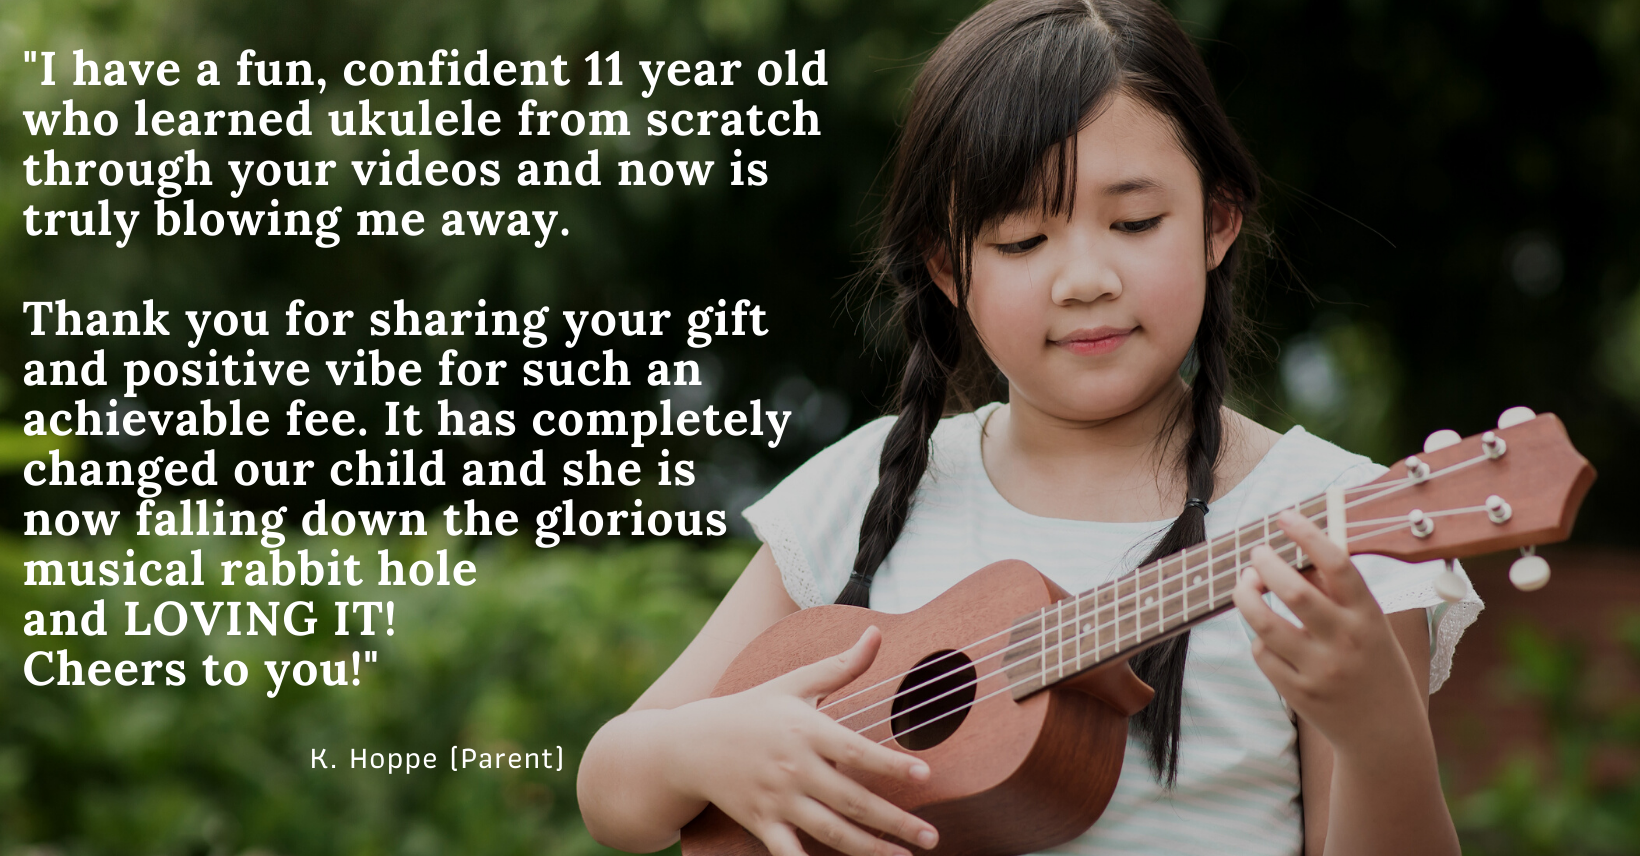 girl with ukulele and quote from parent whose child loved learning the ukulele with Go Kid Music